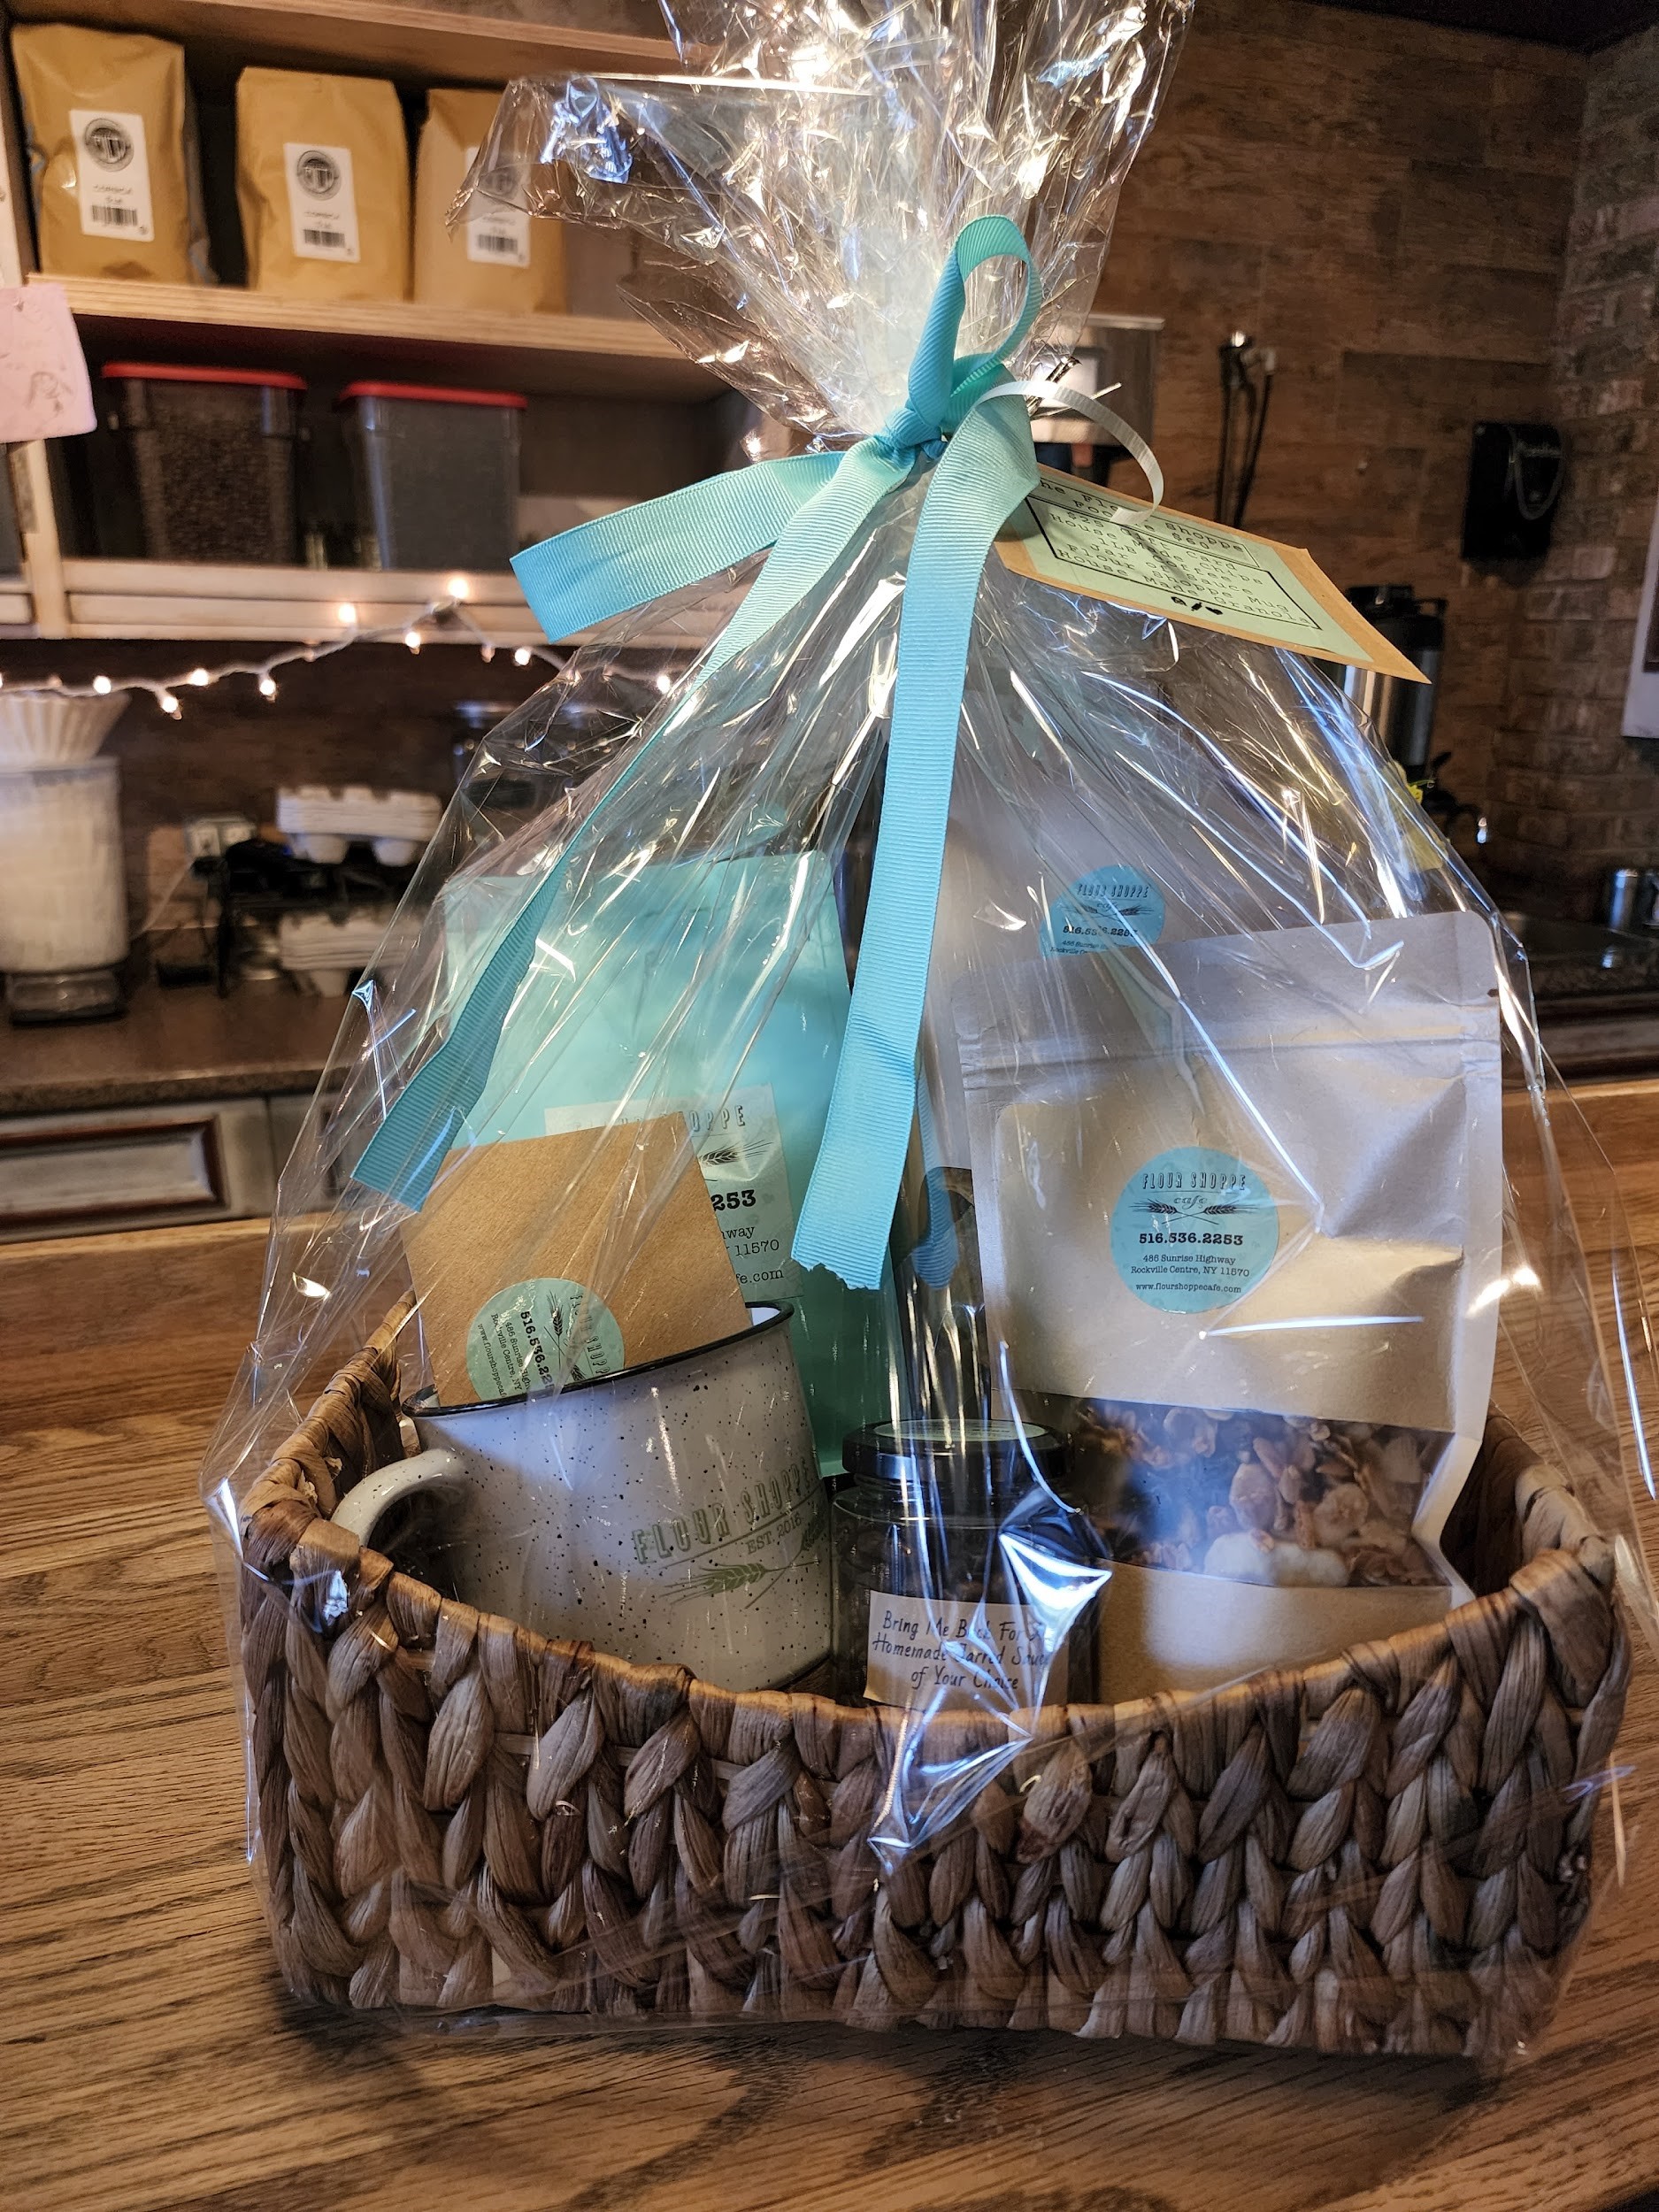 FS Gift Basket: The Foodie